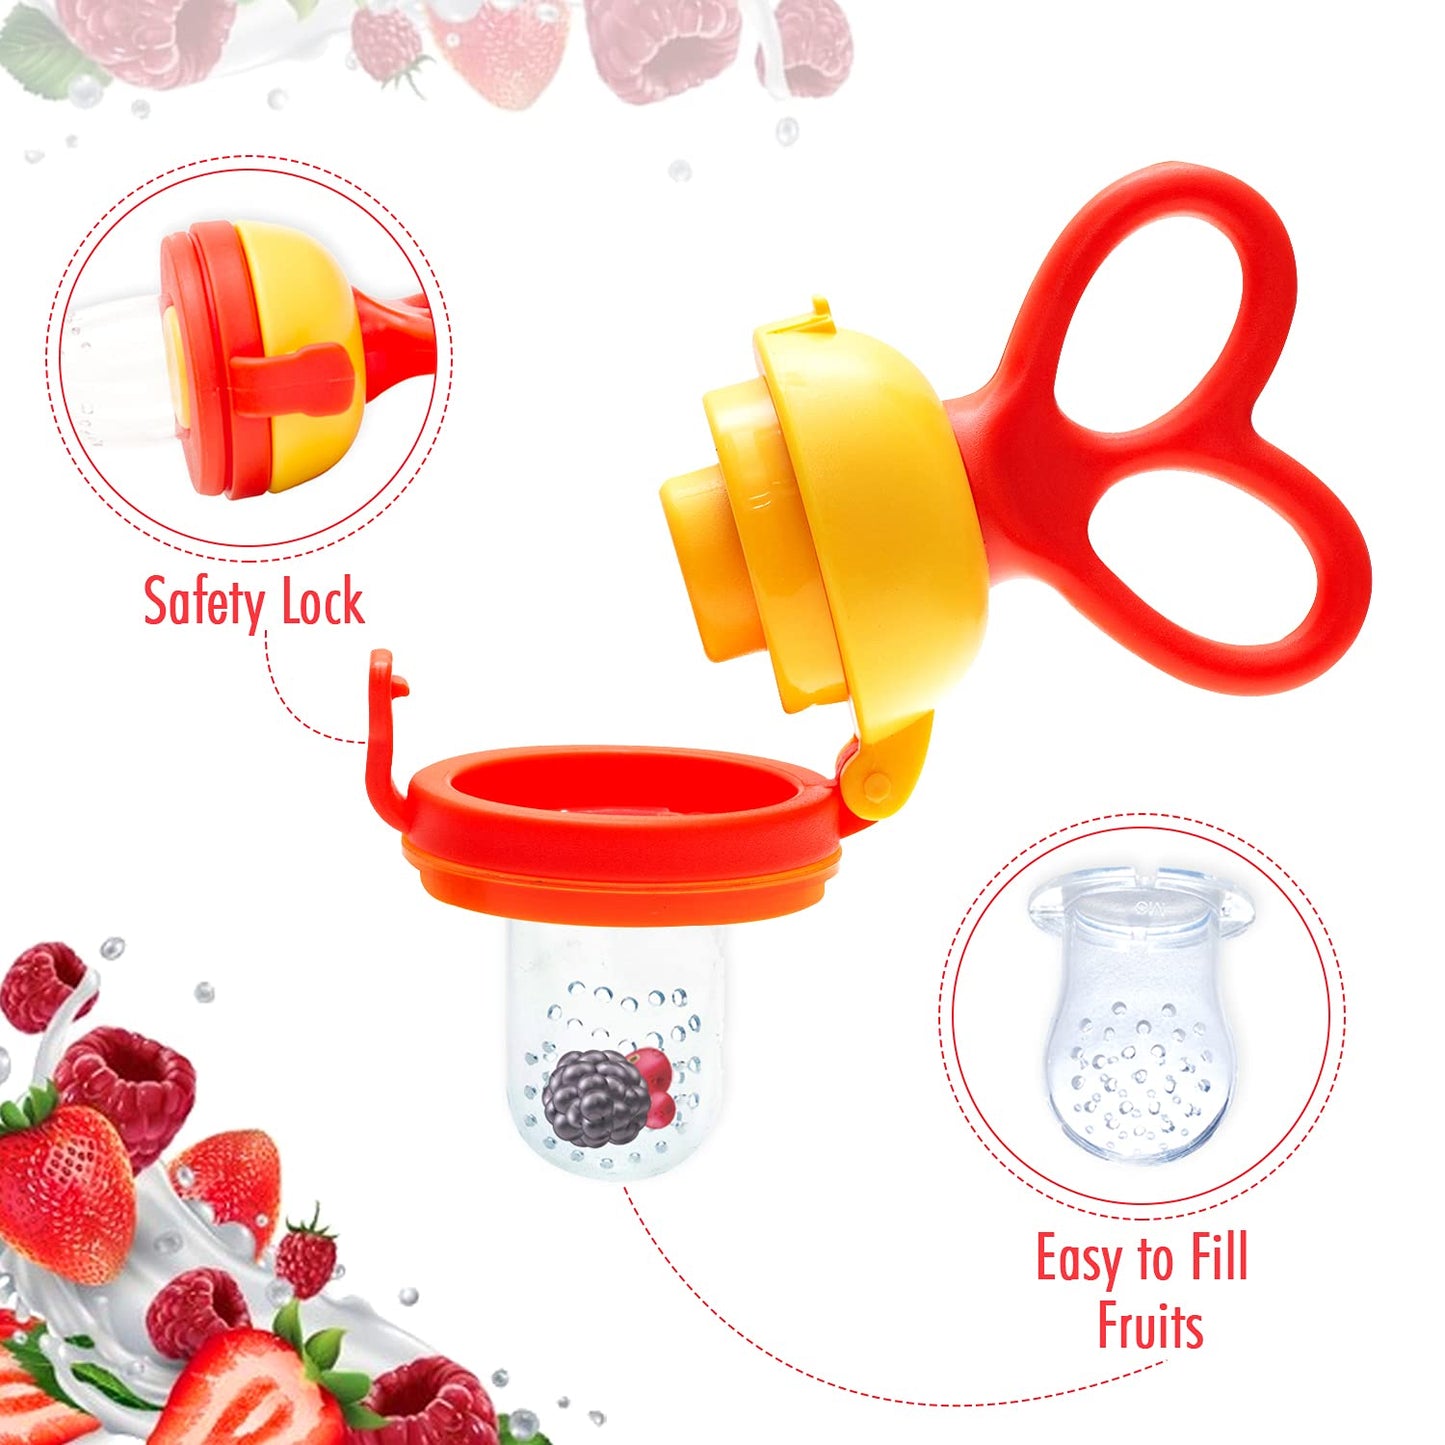 LuvLap Silicone Food/Fruit Nibbler with Extra Mesh, Soft Pacifier/Feeder, Teether for Infant Baby, BPA Free( 18601)